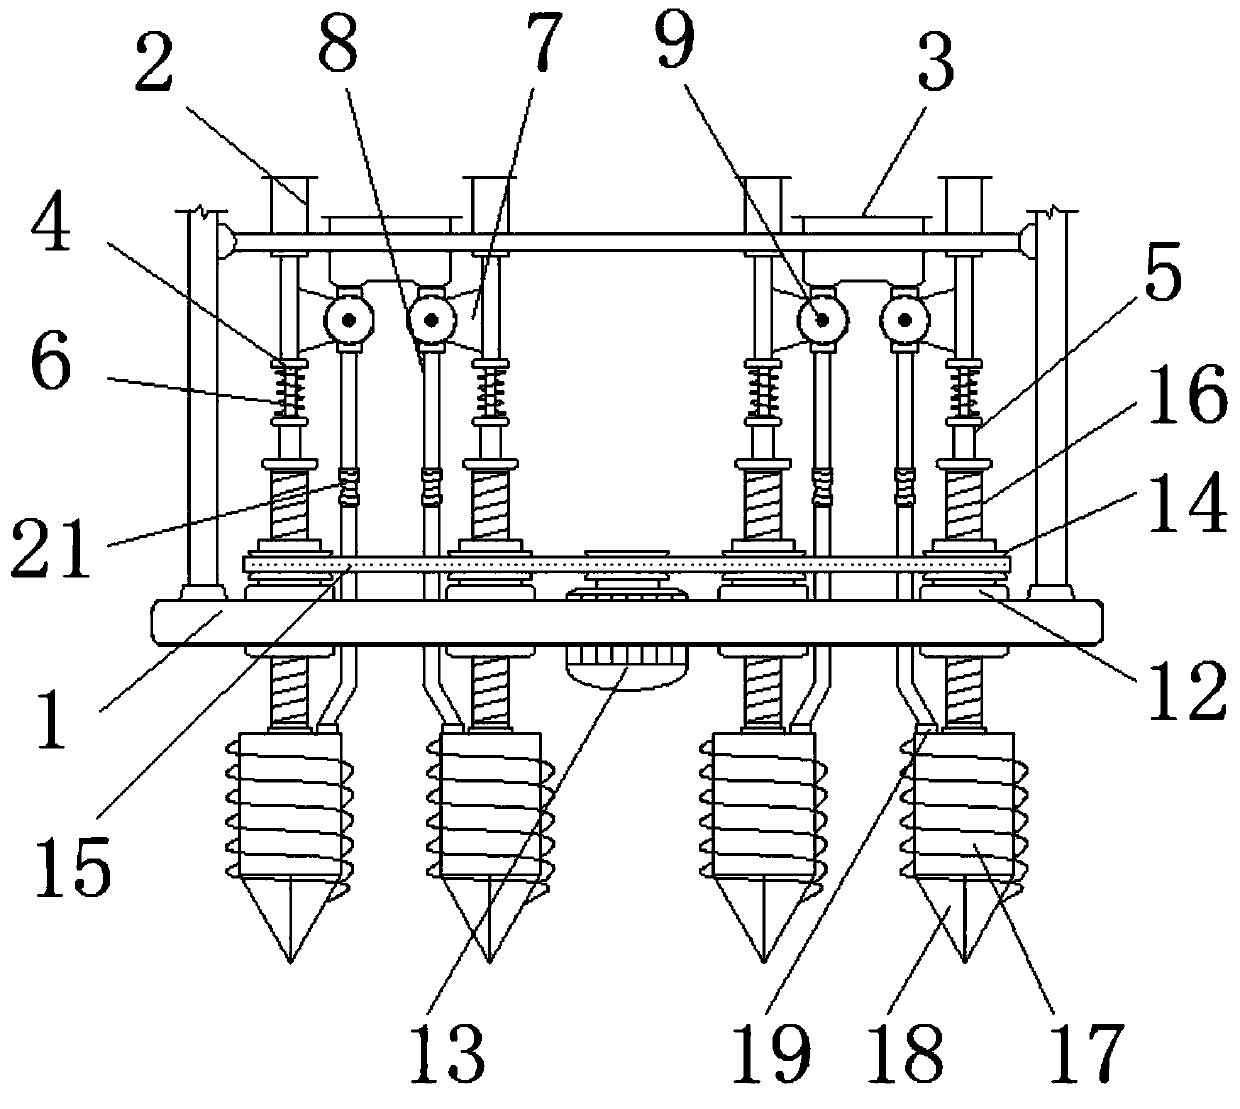 Agricultural seeding device capable of precisely adjusting cutting depth during seeding